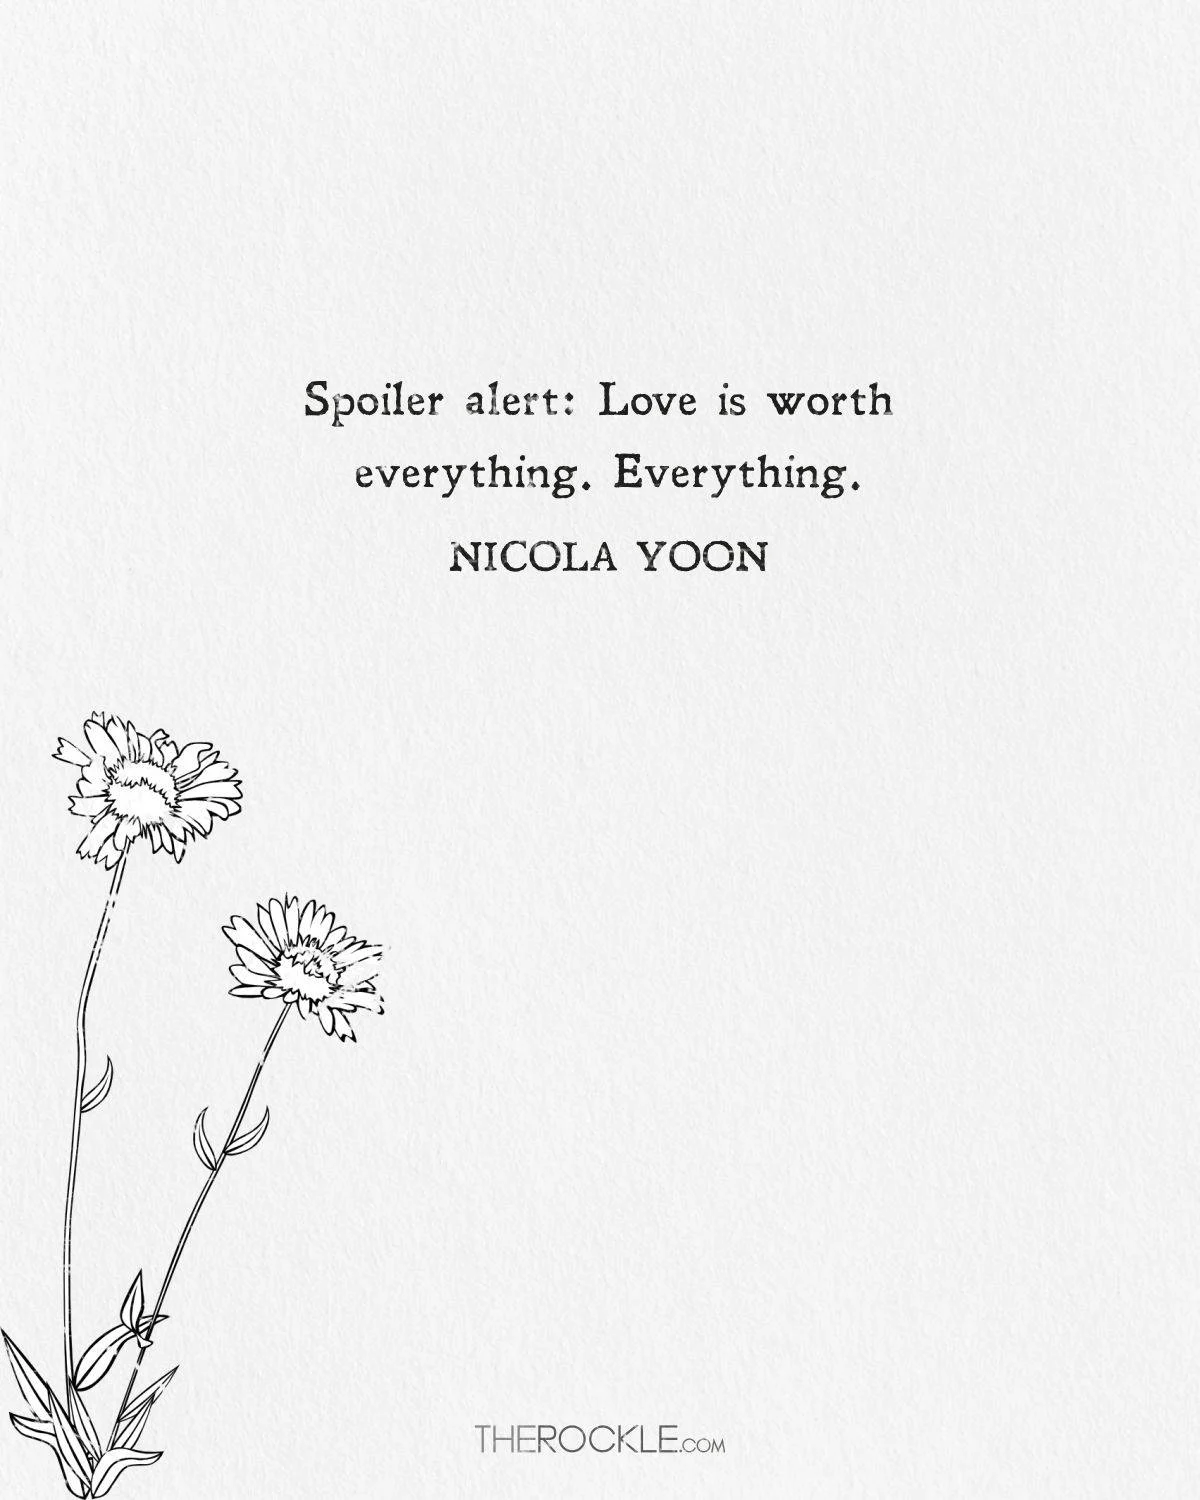 short love quote by Nicola Yoon